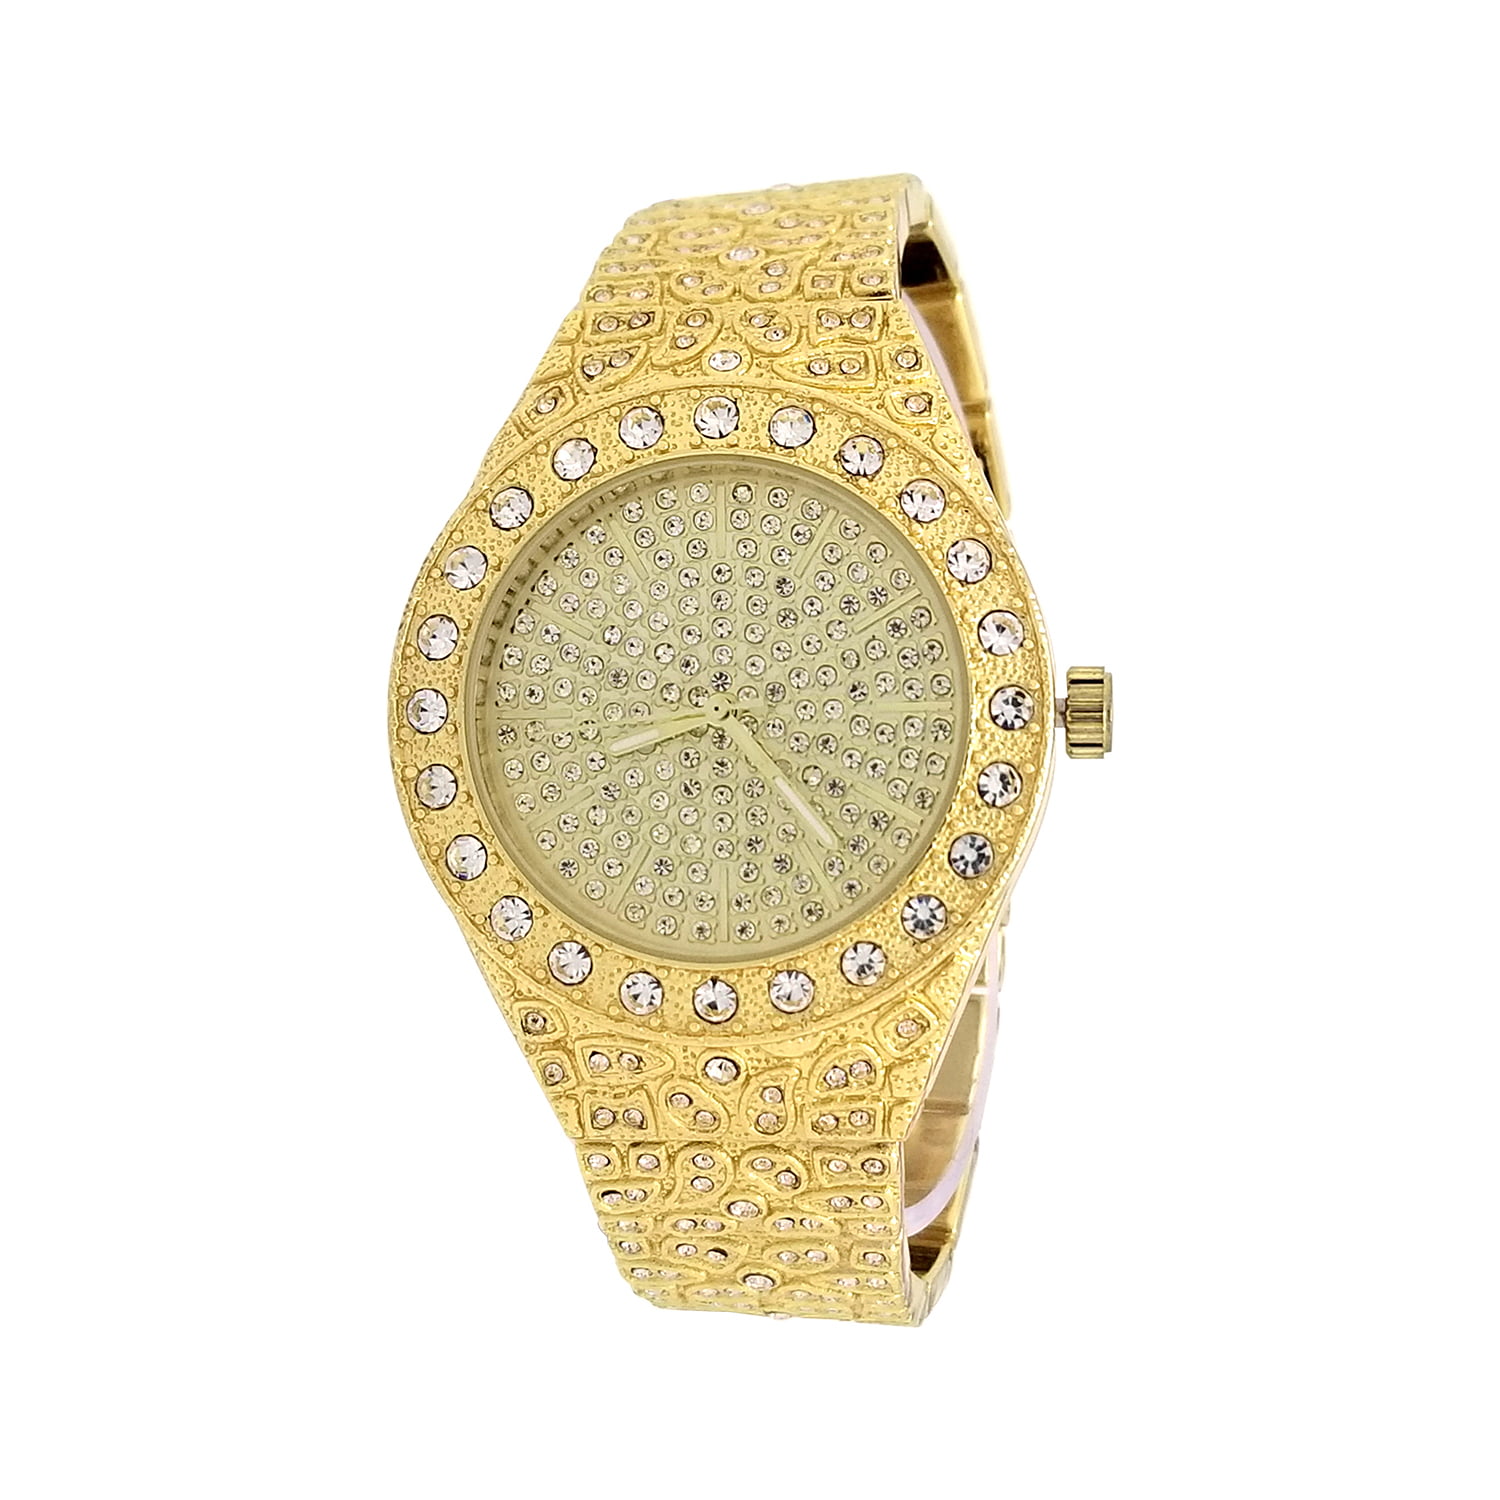 Techno Pave 14K Gold Plated Fully Iced Out Diamond-Cut MicroPave Dial ...